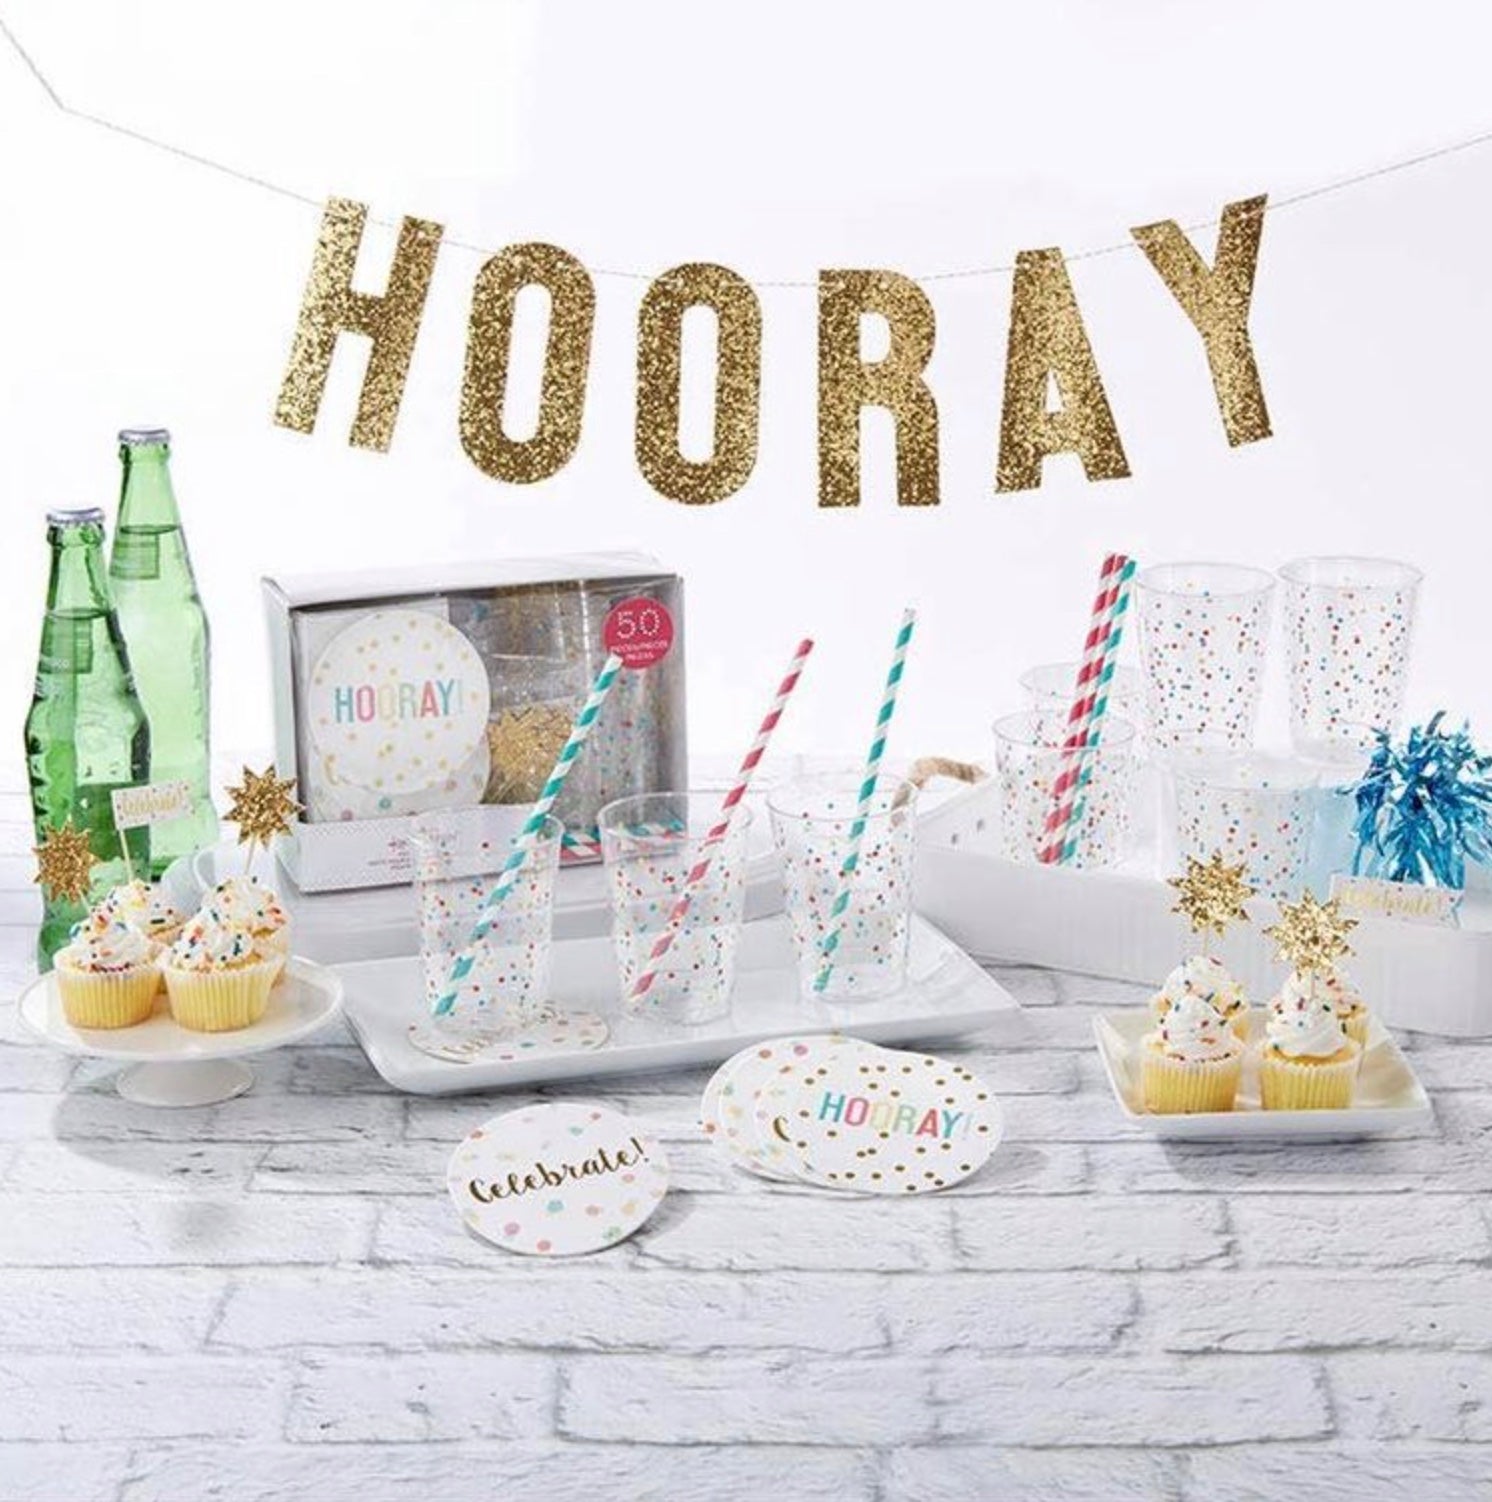 Hooray Party - All Occasion